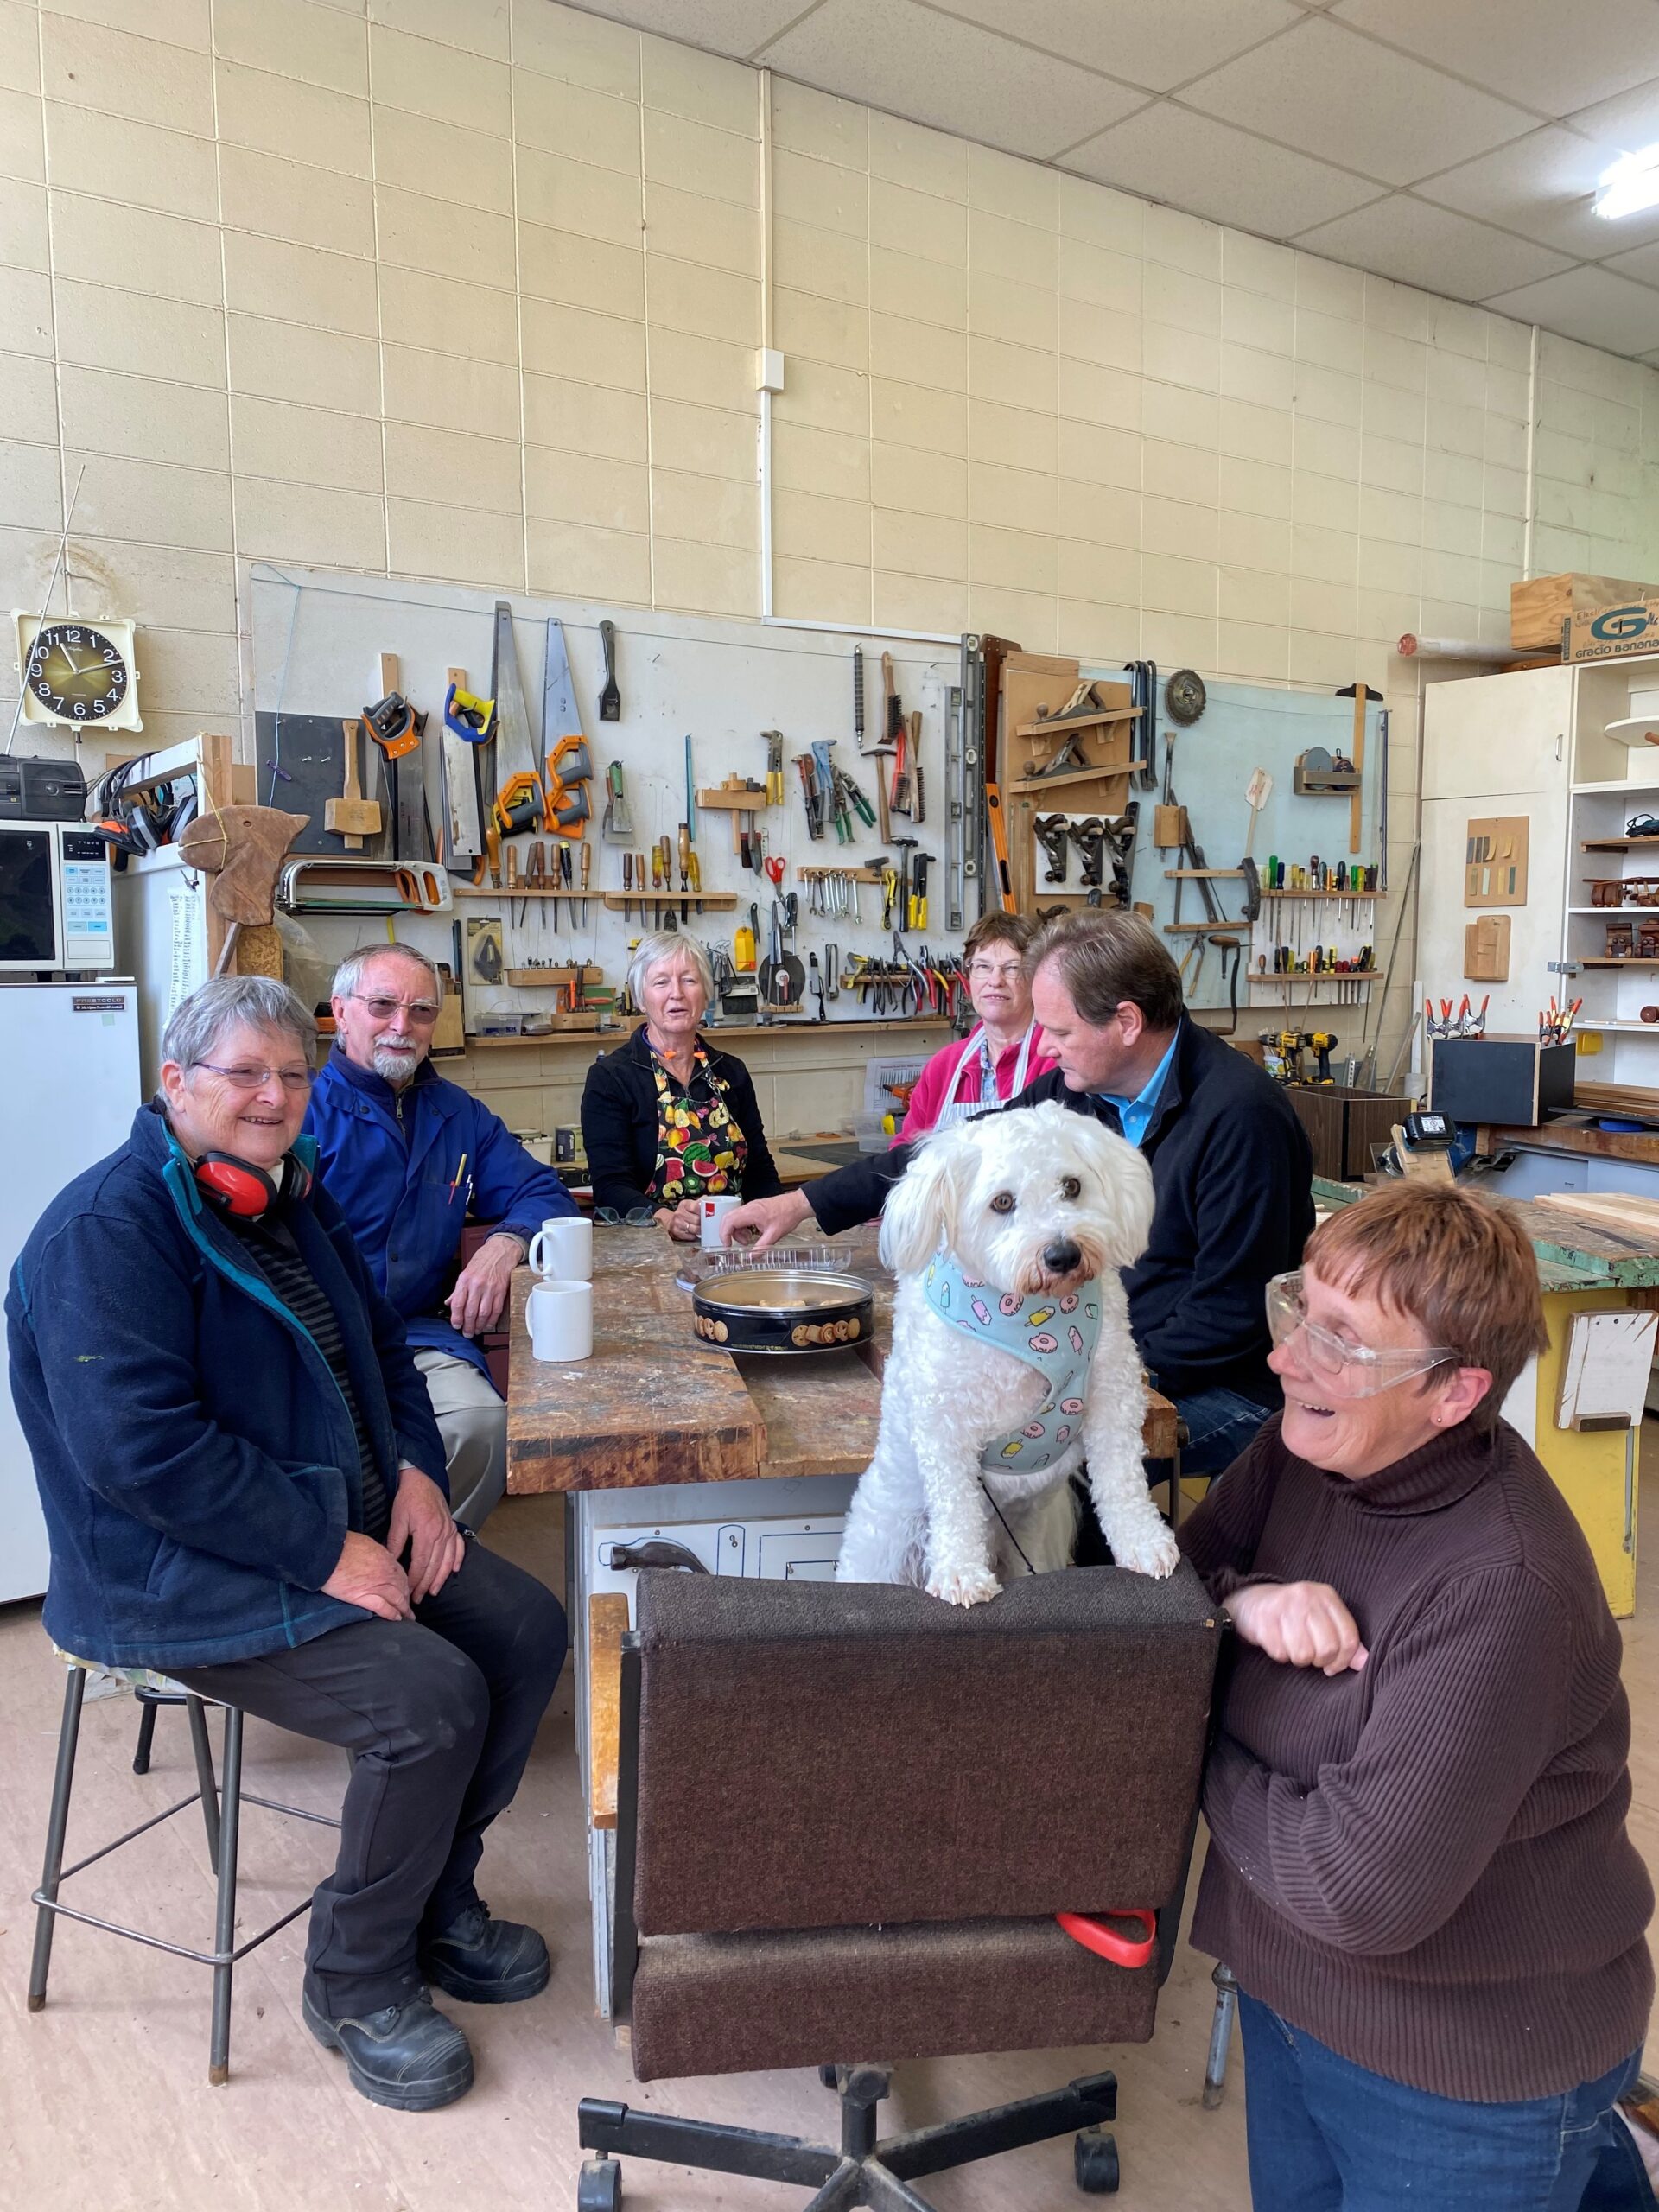 Group of elderly people and a dog having morning tea at woodworking workshop